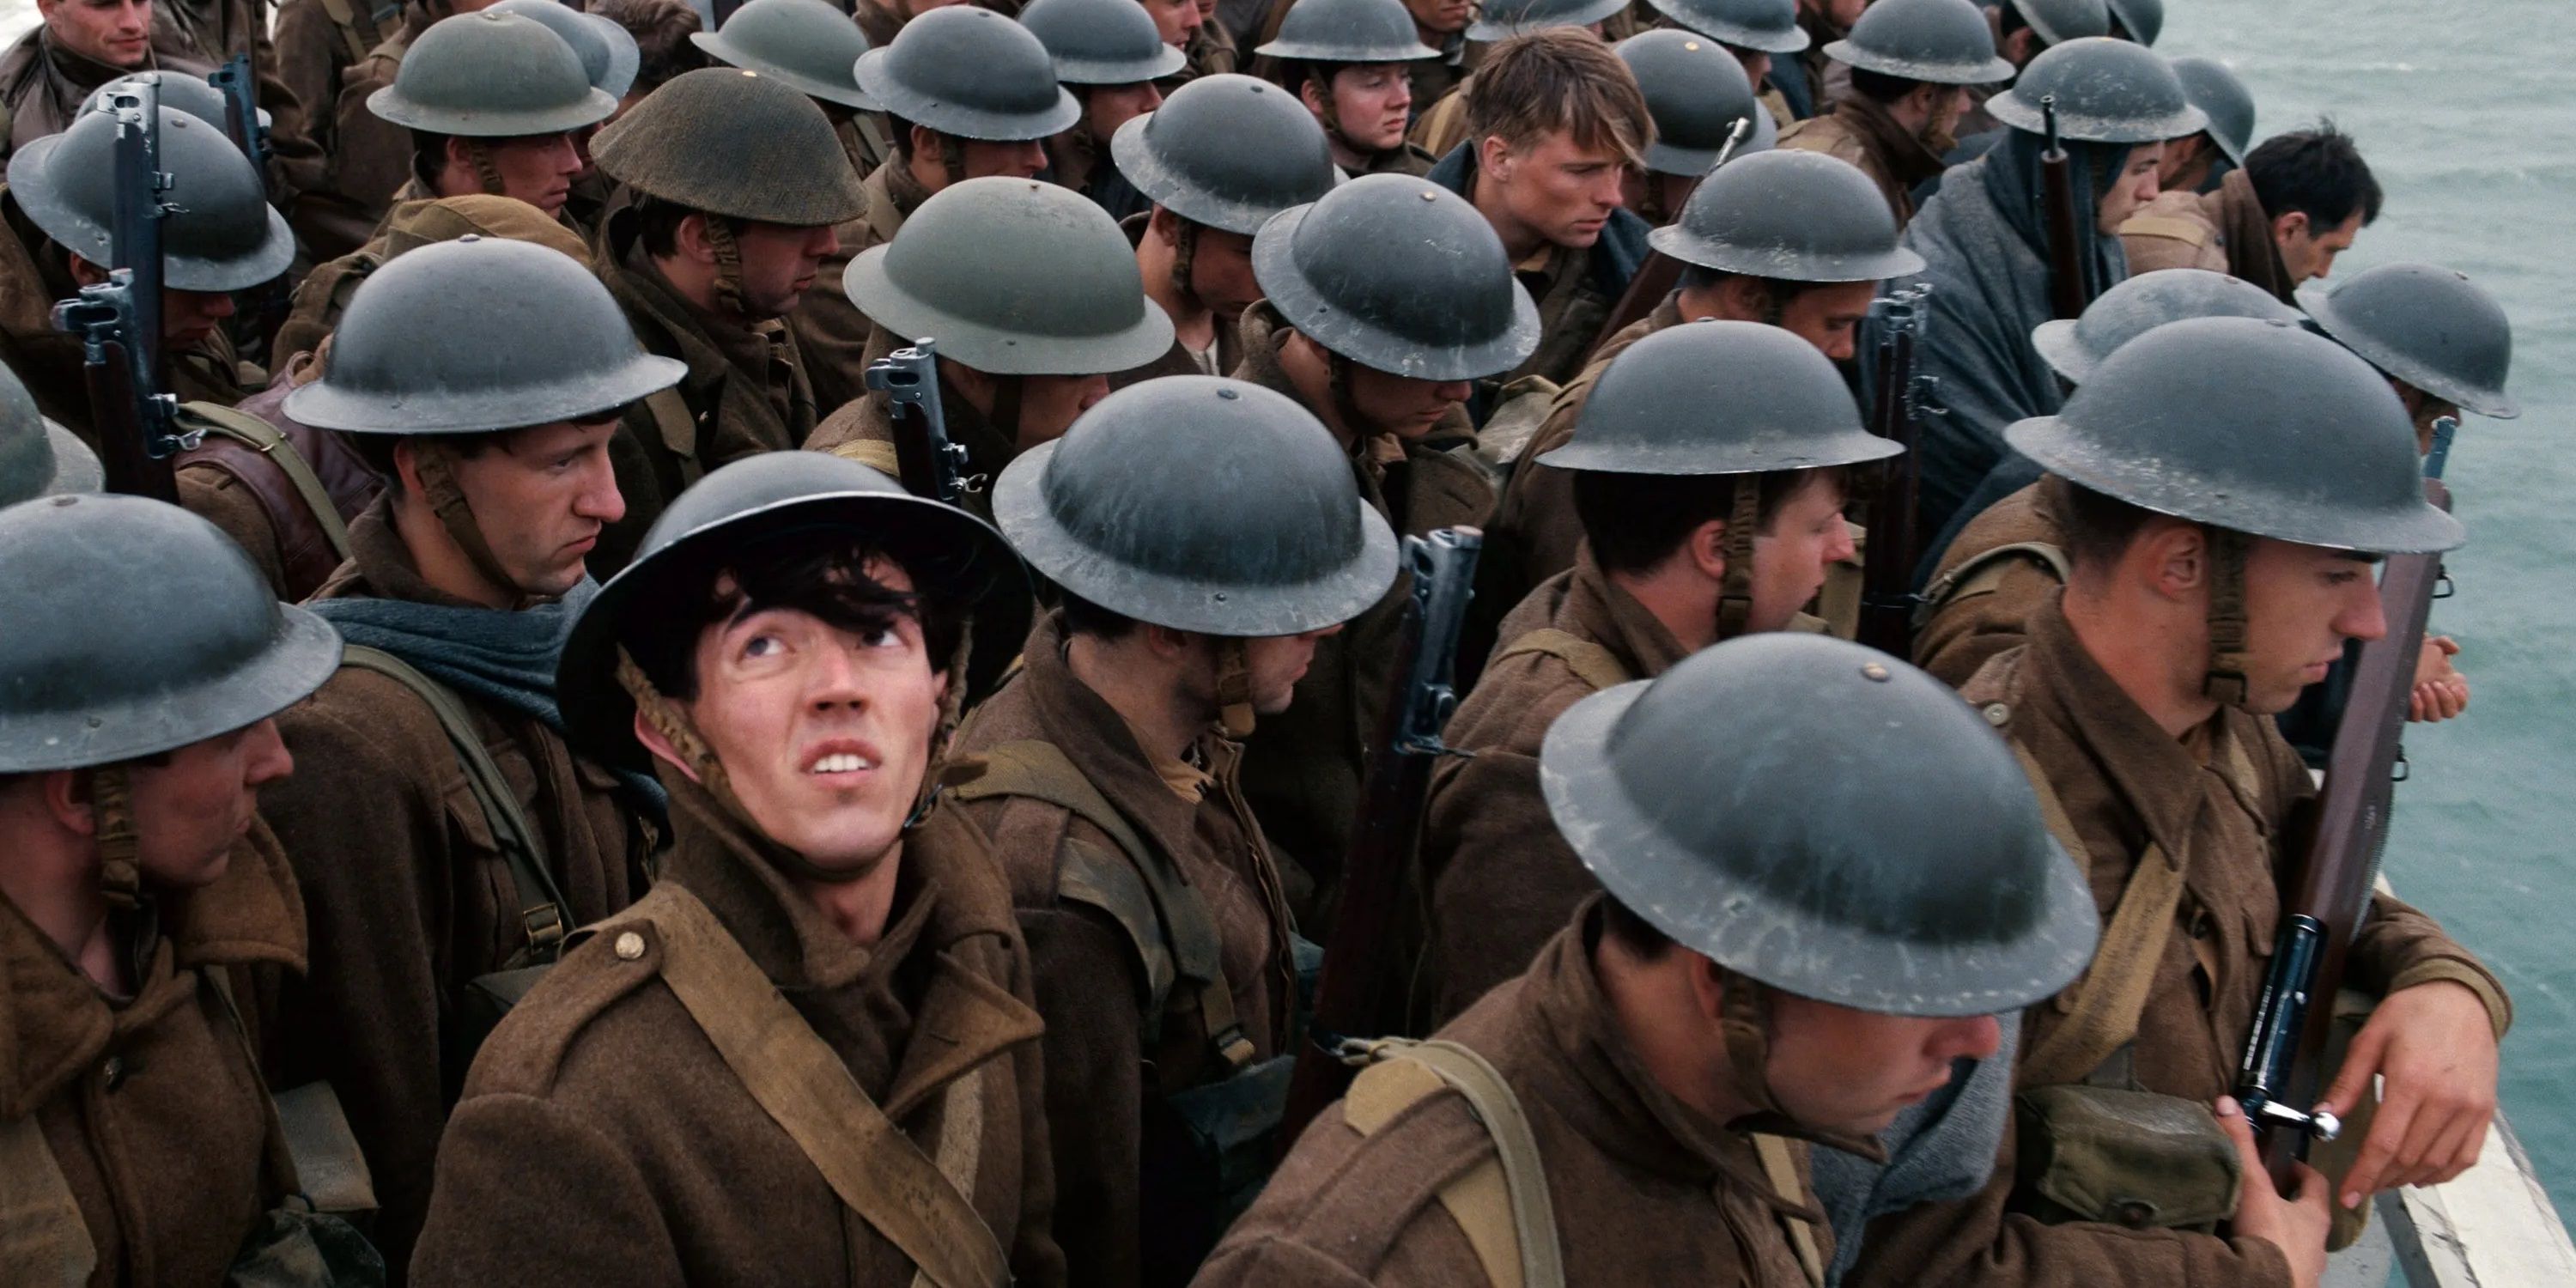 A soldier looking up amid a crowd of soldiers on a boat in Dunkirk